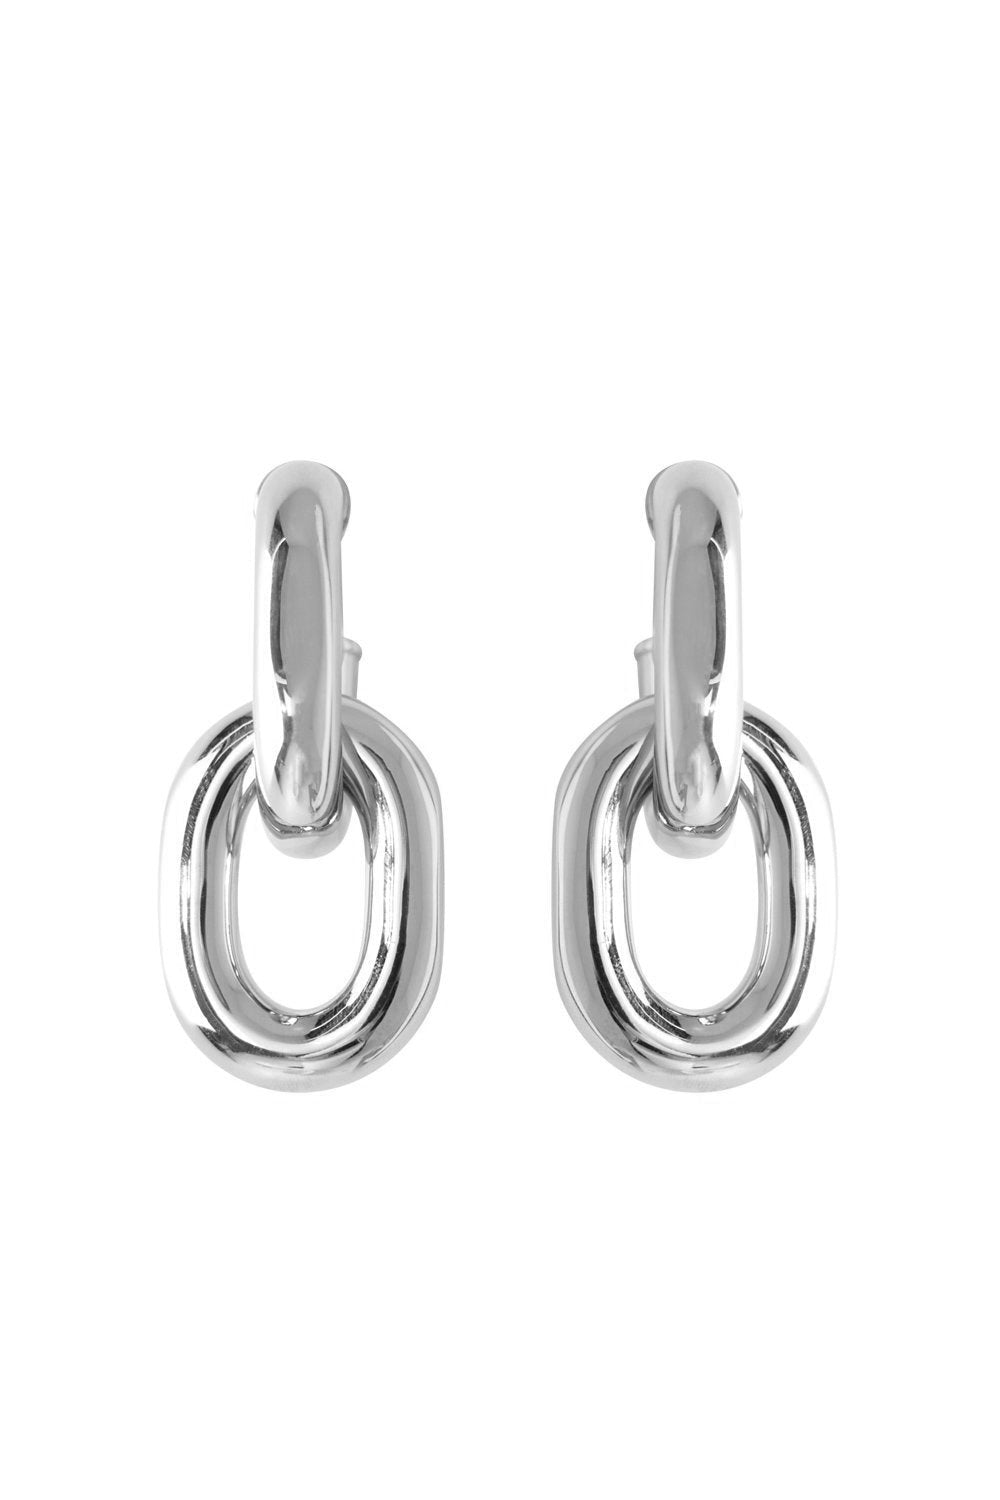 Saint Laurent Curb Link Chain Earrings in Pale/Or Laiton